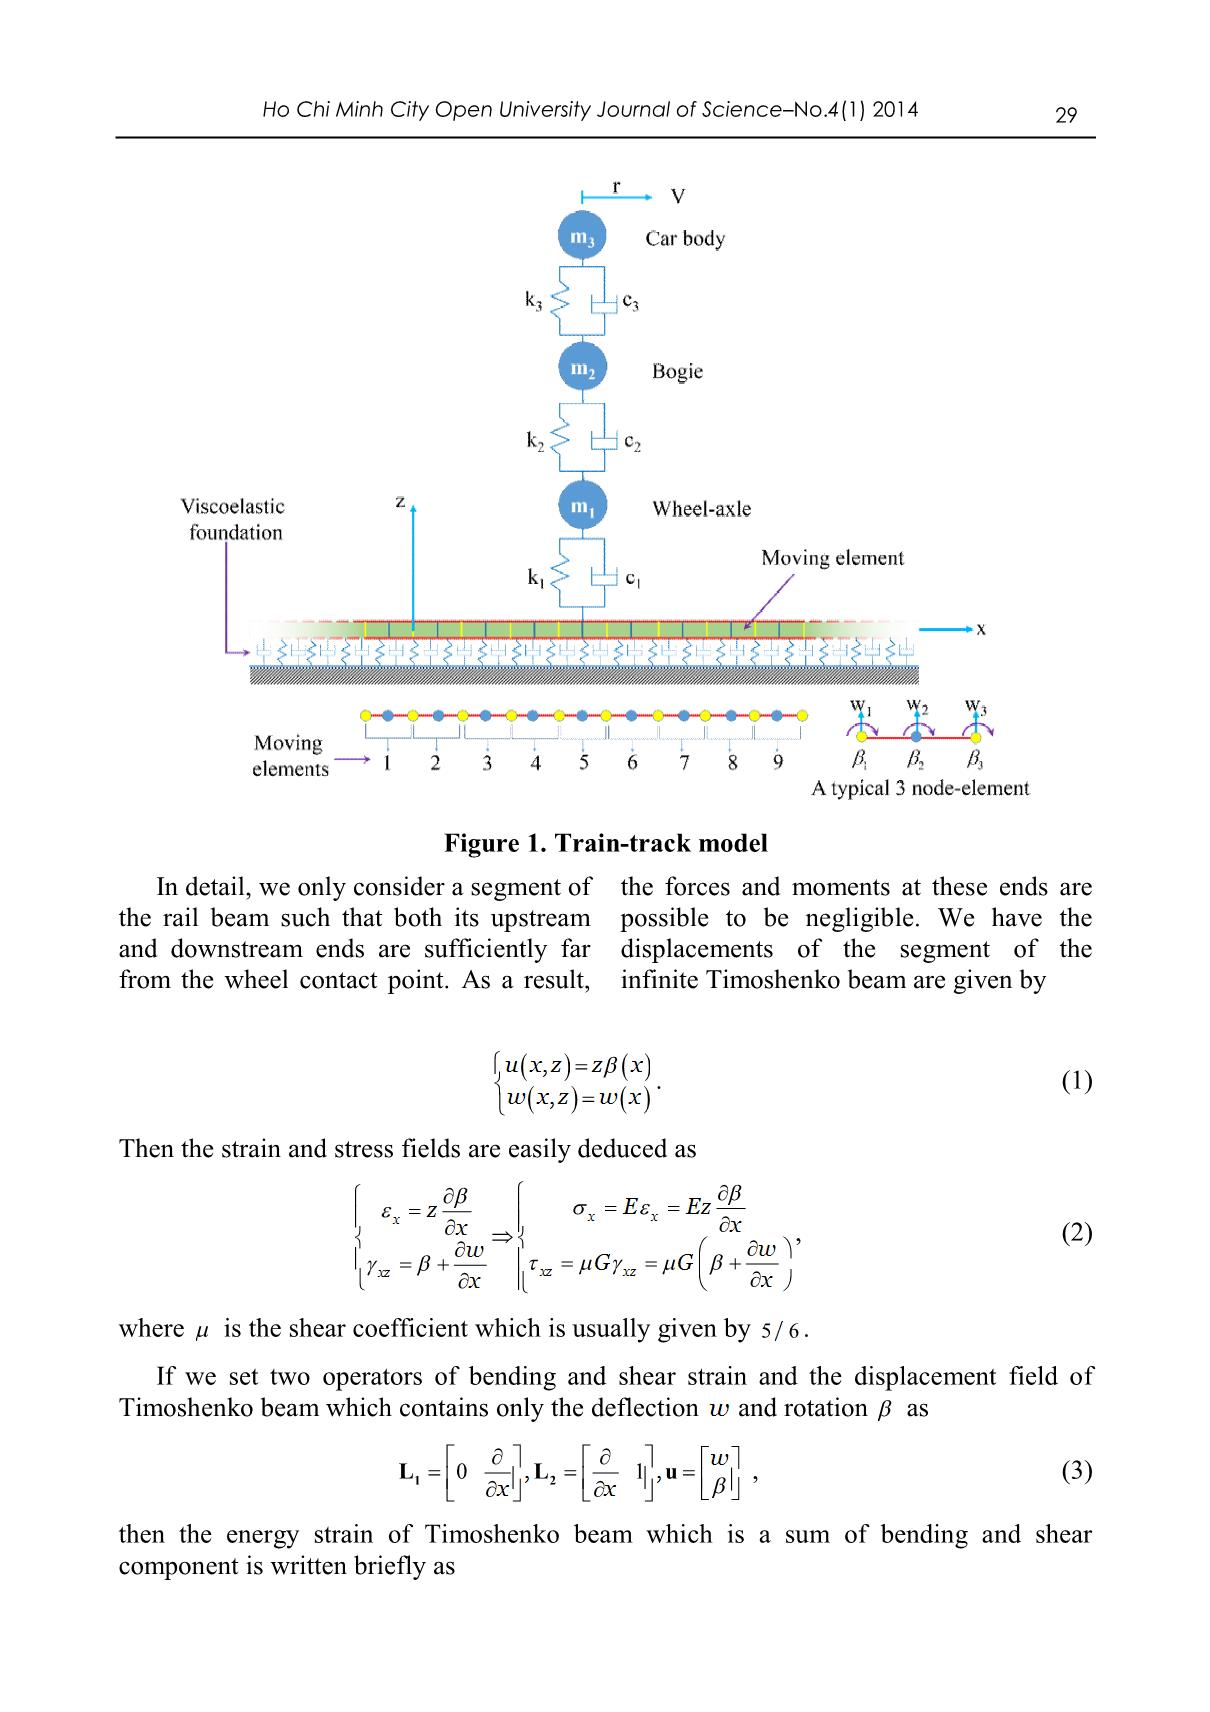 A moving element method using timoshenko’s beam theory for dynamic analysis of train - Track systems trang 4